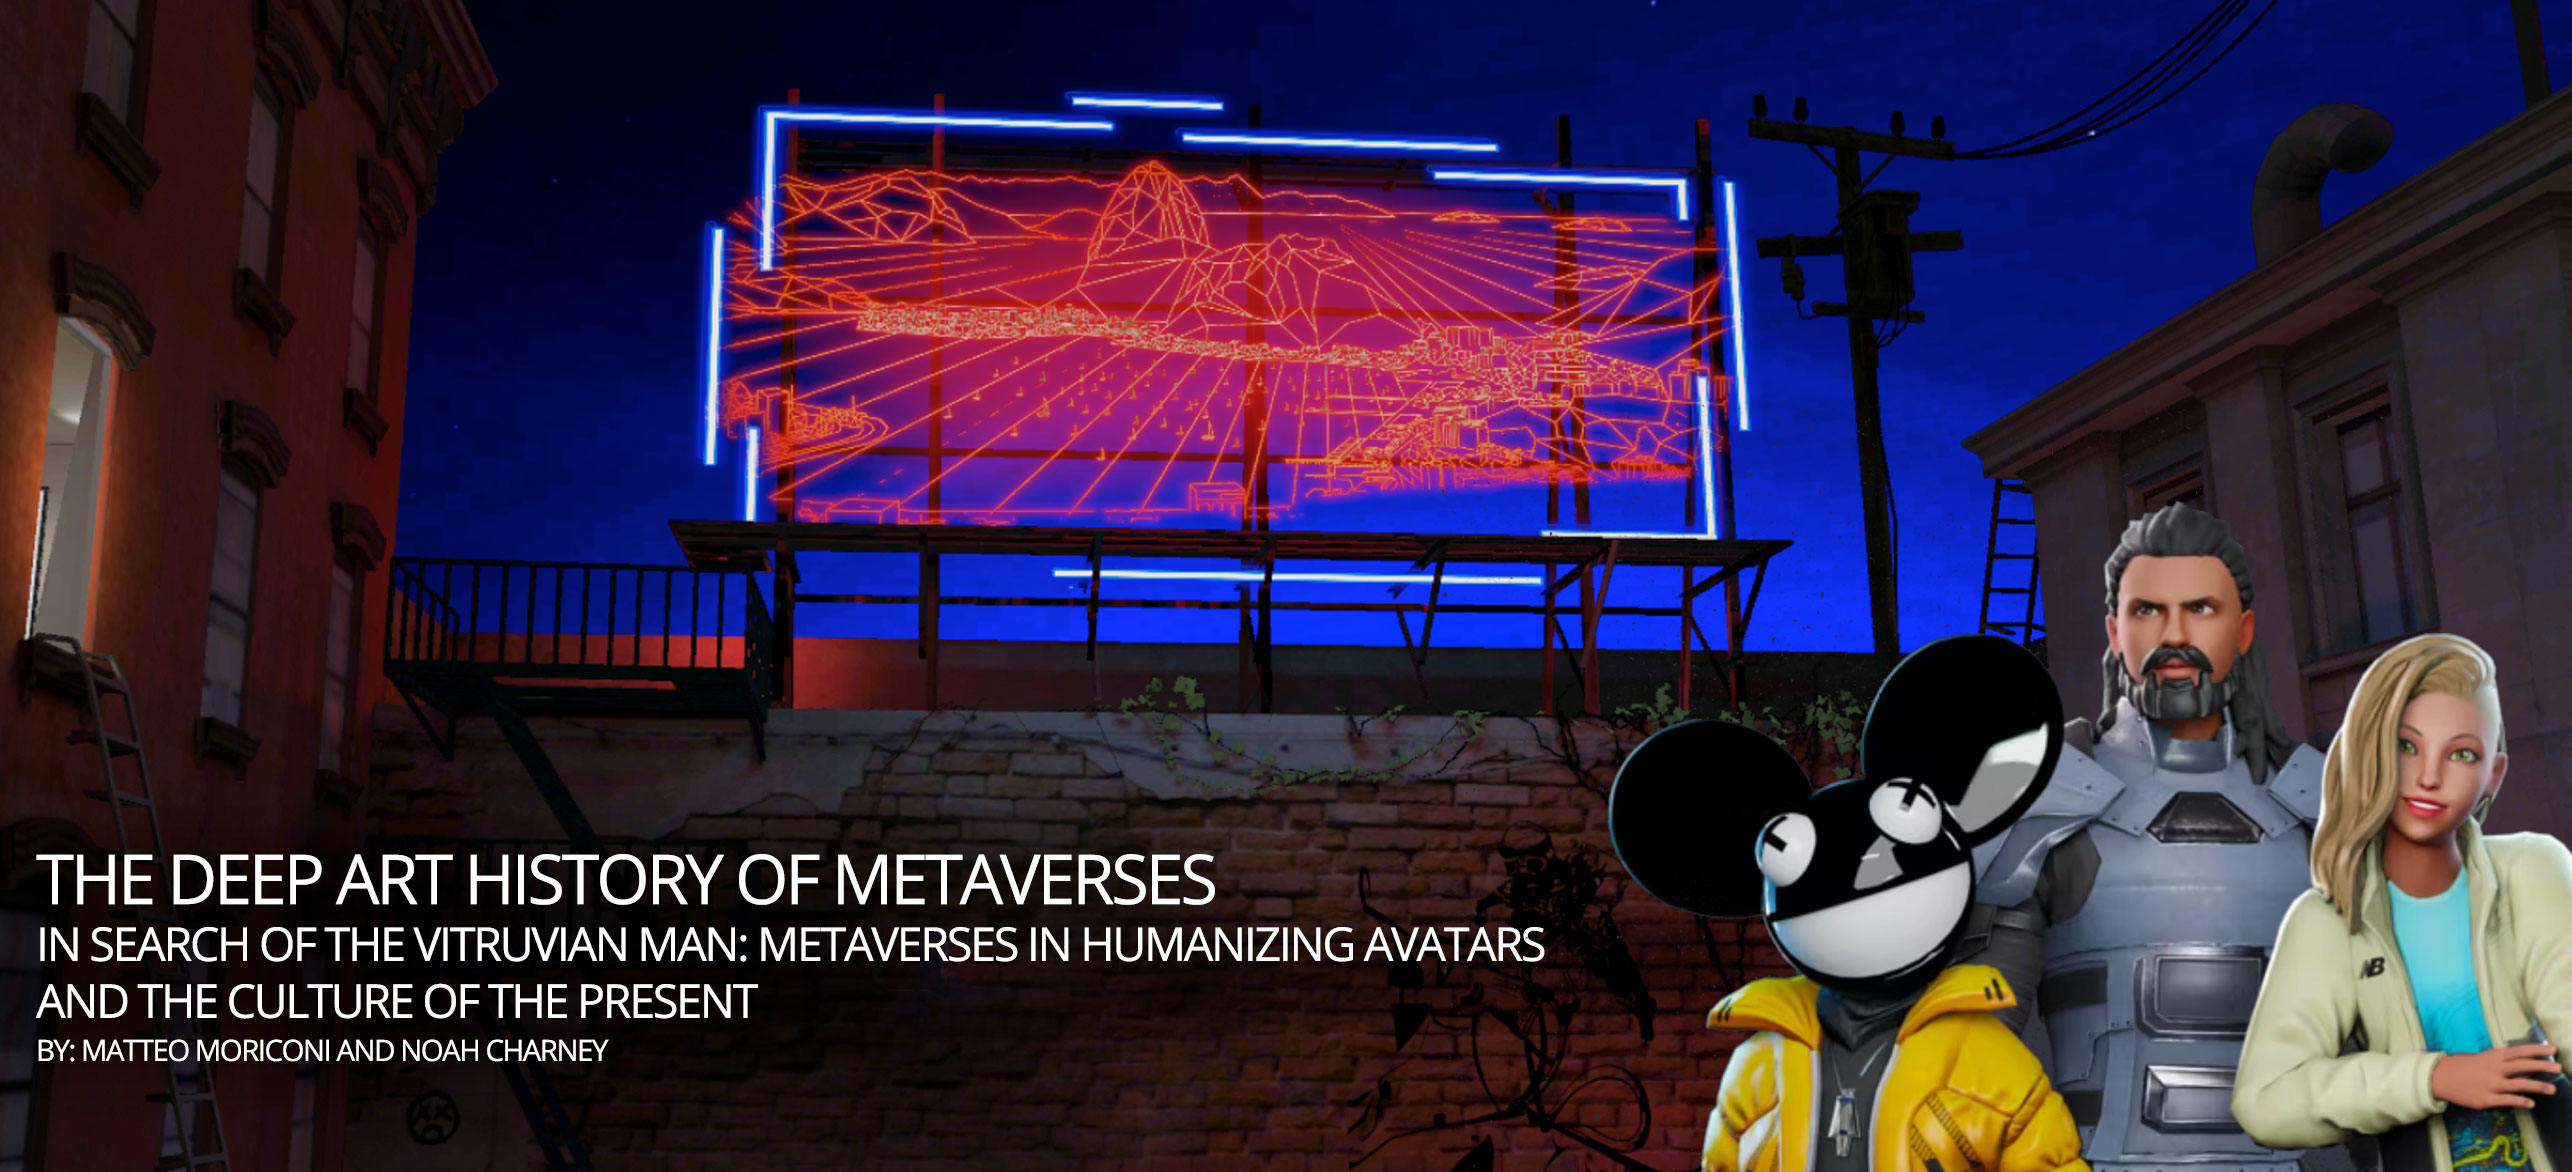 Experience realistic 3D avatars in the Metaverse with ease., by Lizajones